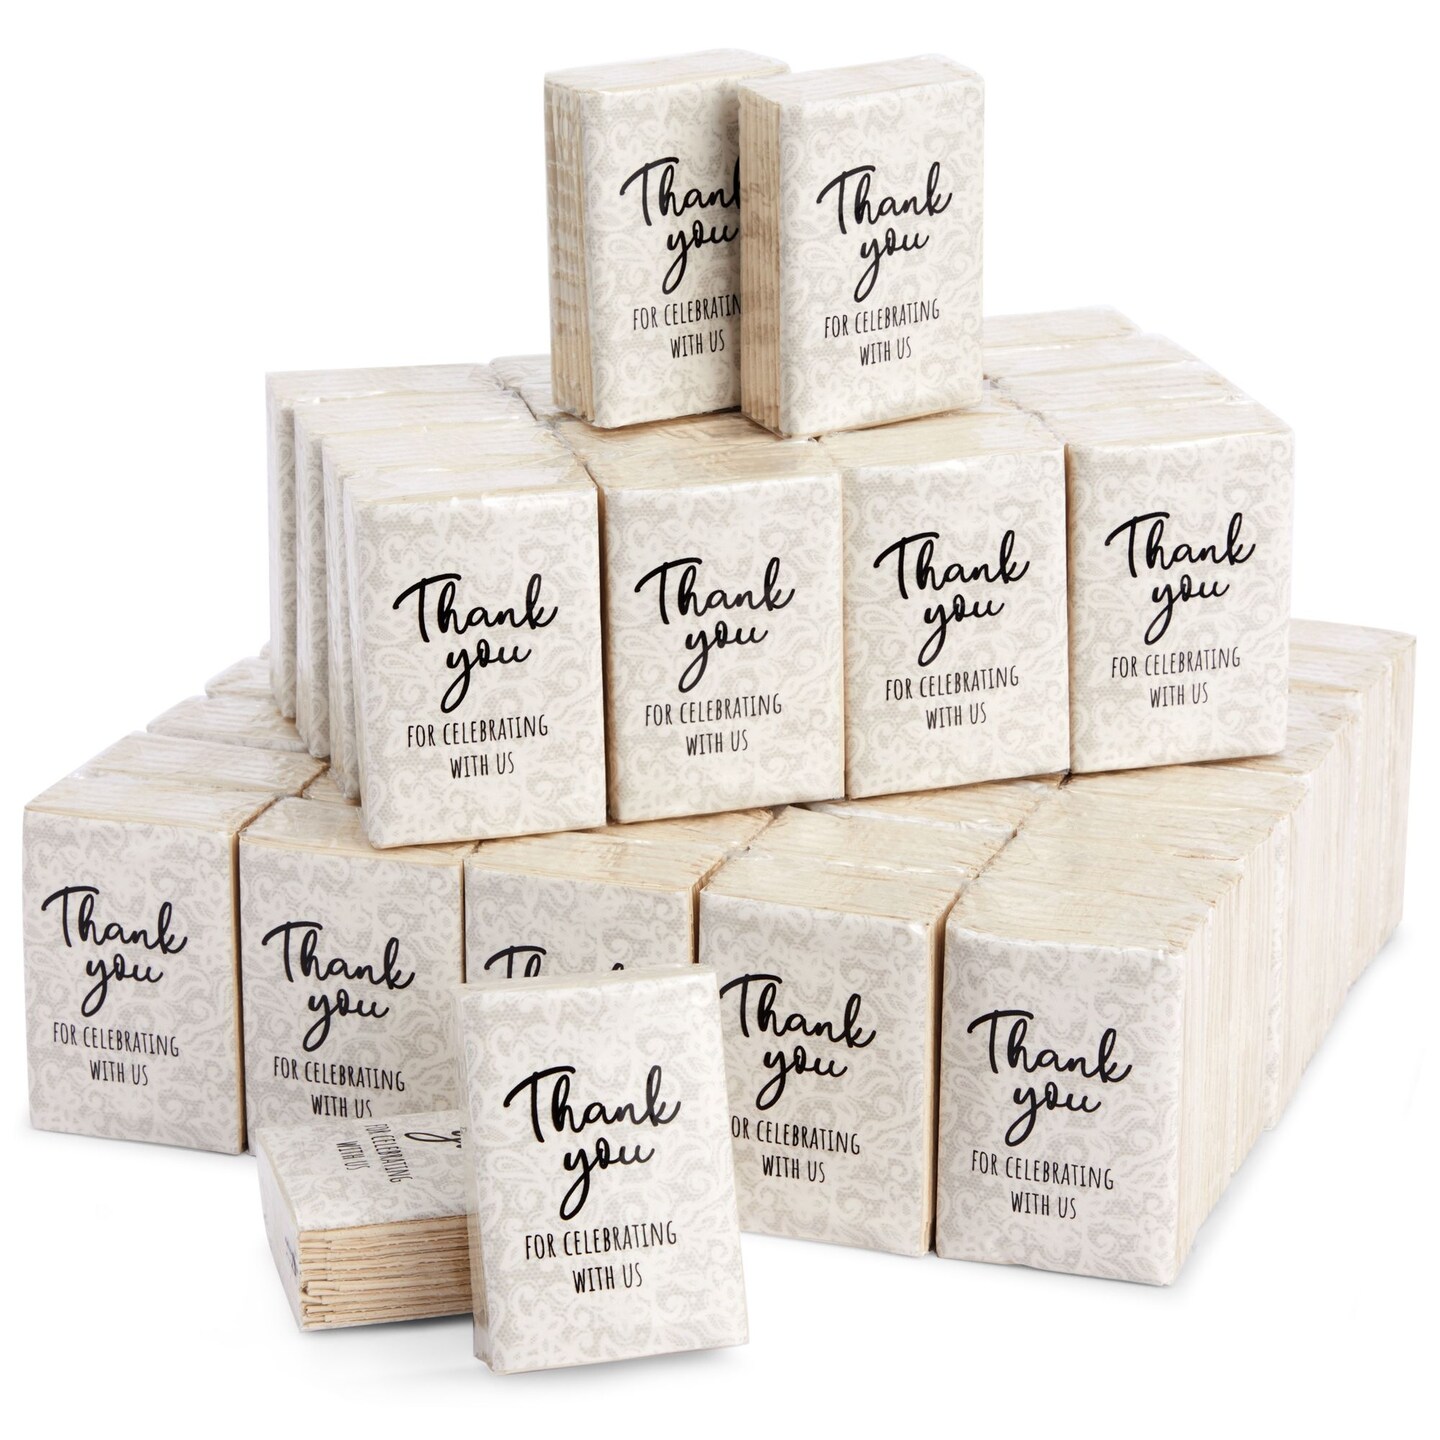 60 Pack Bulk Individual Pocket Size Facial Travel Tissues for Wedding, Graduation, Anniversary, Guests, Thank You For Celebrating With Us (3-Ply Bamboo, 3 x 2 In)